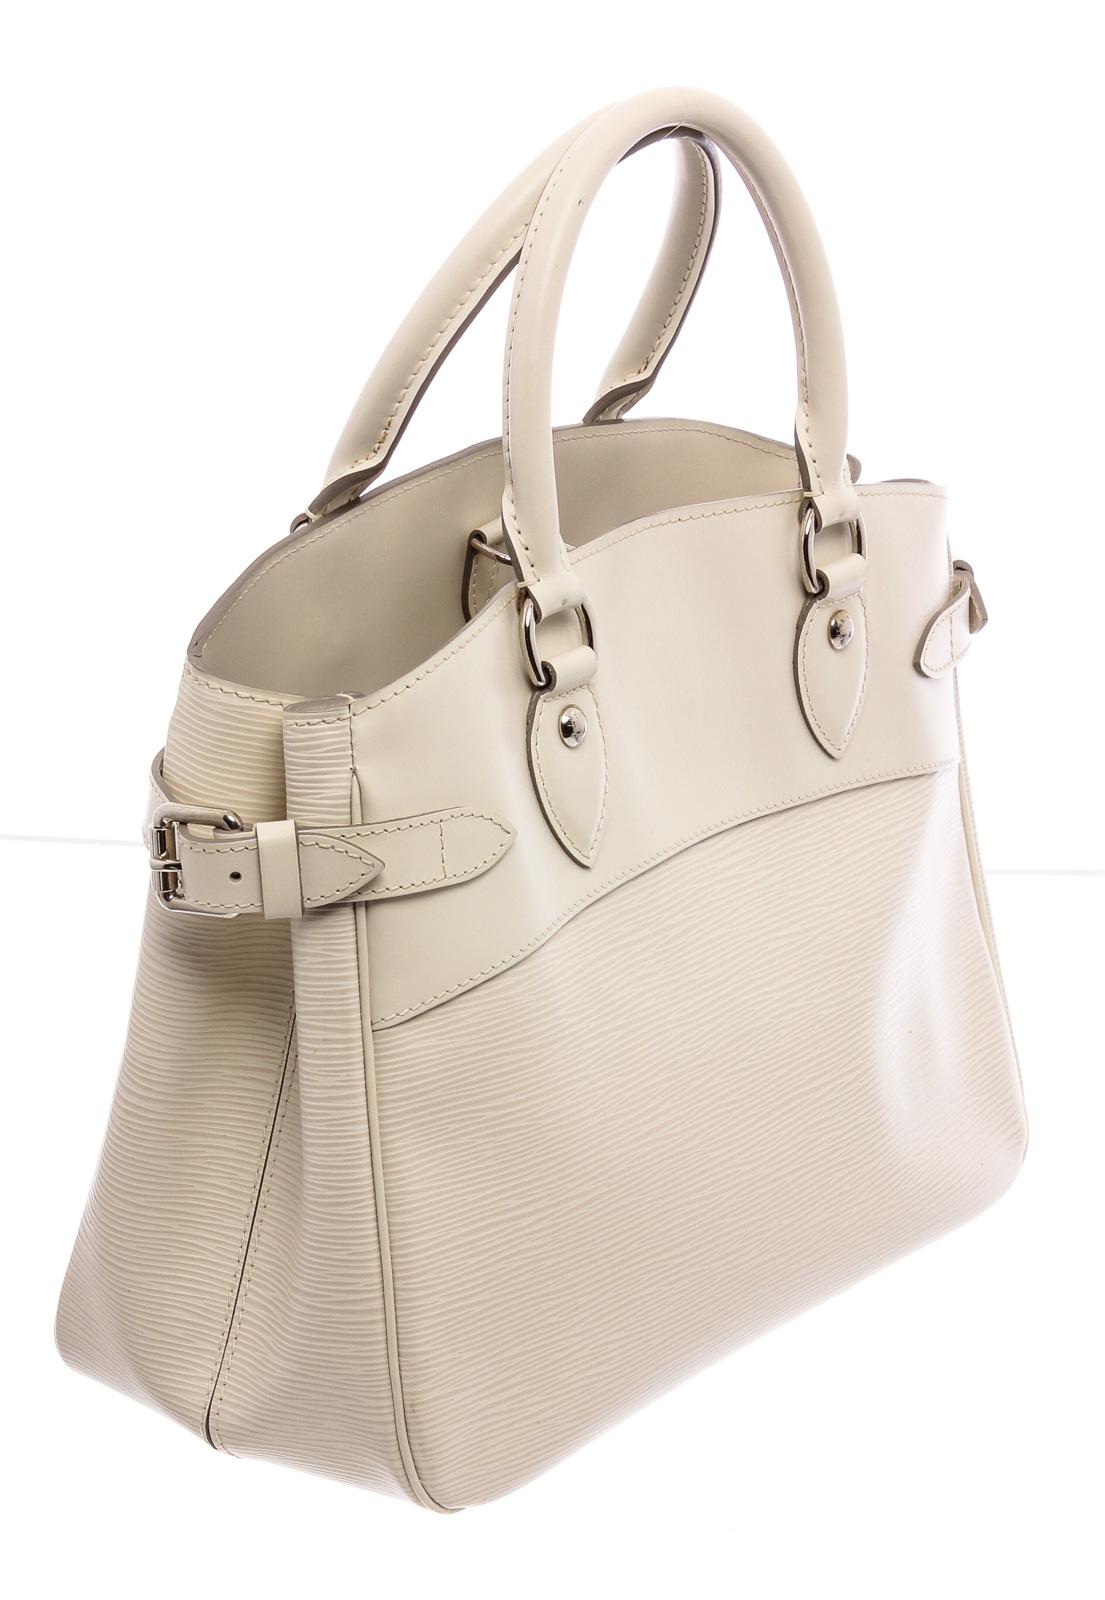 White Epi leather Louis Vuitton Passy GM with silver-tone hardware, dual rolled shoulder straps, three interior compartments; one with zip closure, tonal canvas lining, dual interior slip pockets and lobster clasp closure at top.

21531MSC